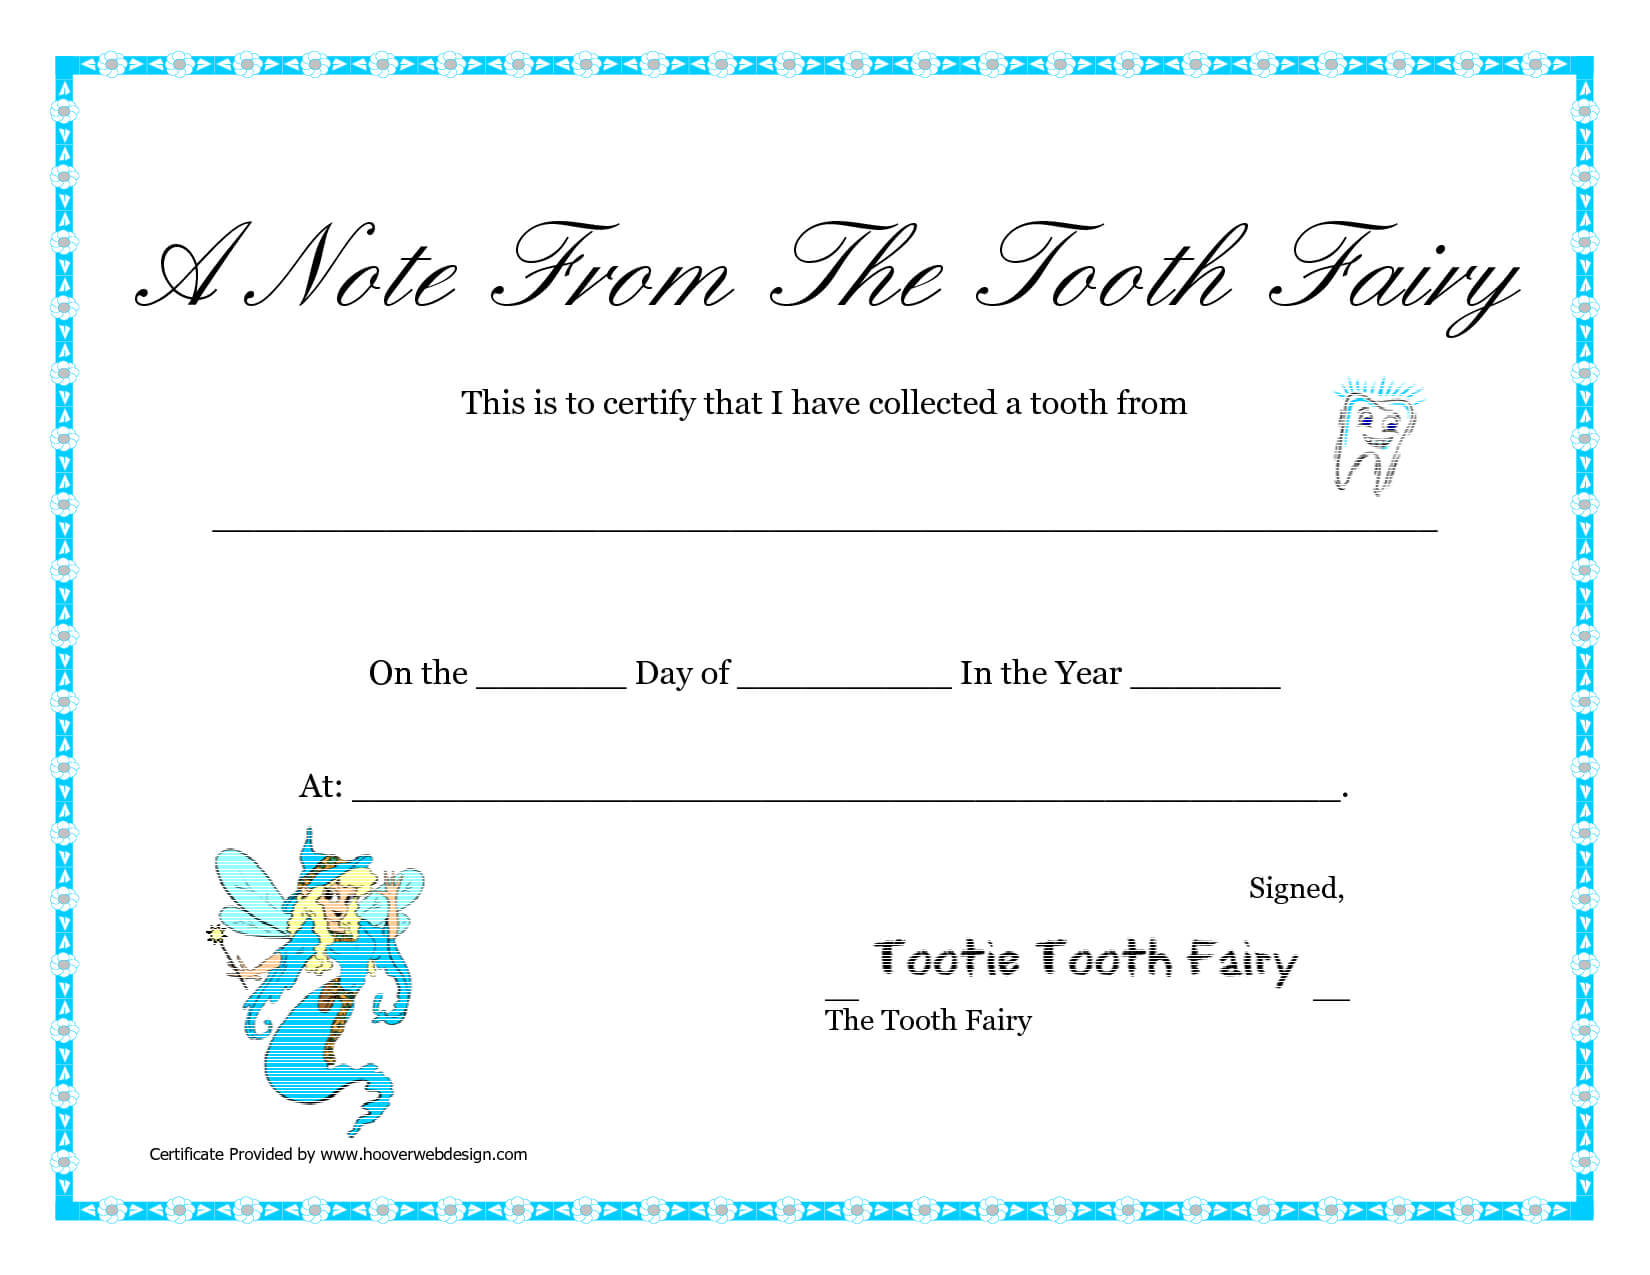 Free Tooth Fairy Certificate Template : Free Printable Tooth Fairy Letter T...